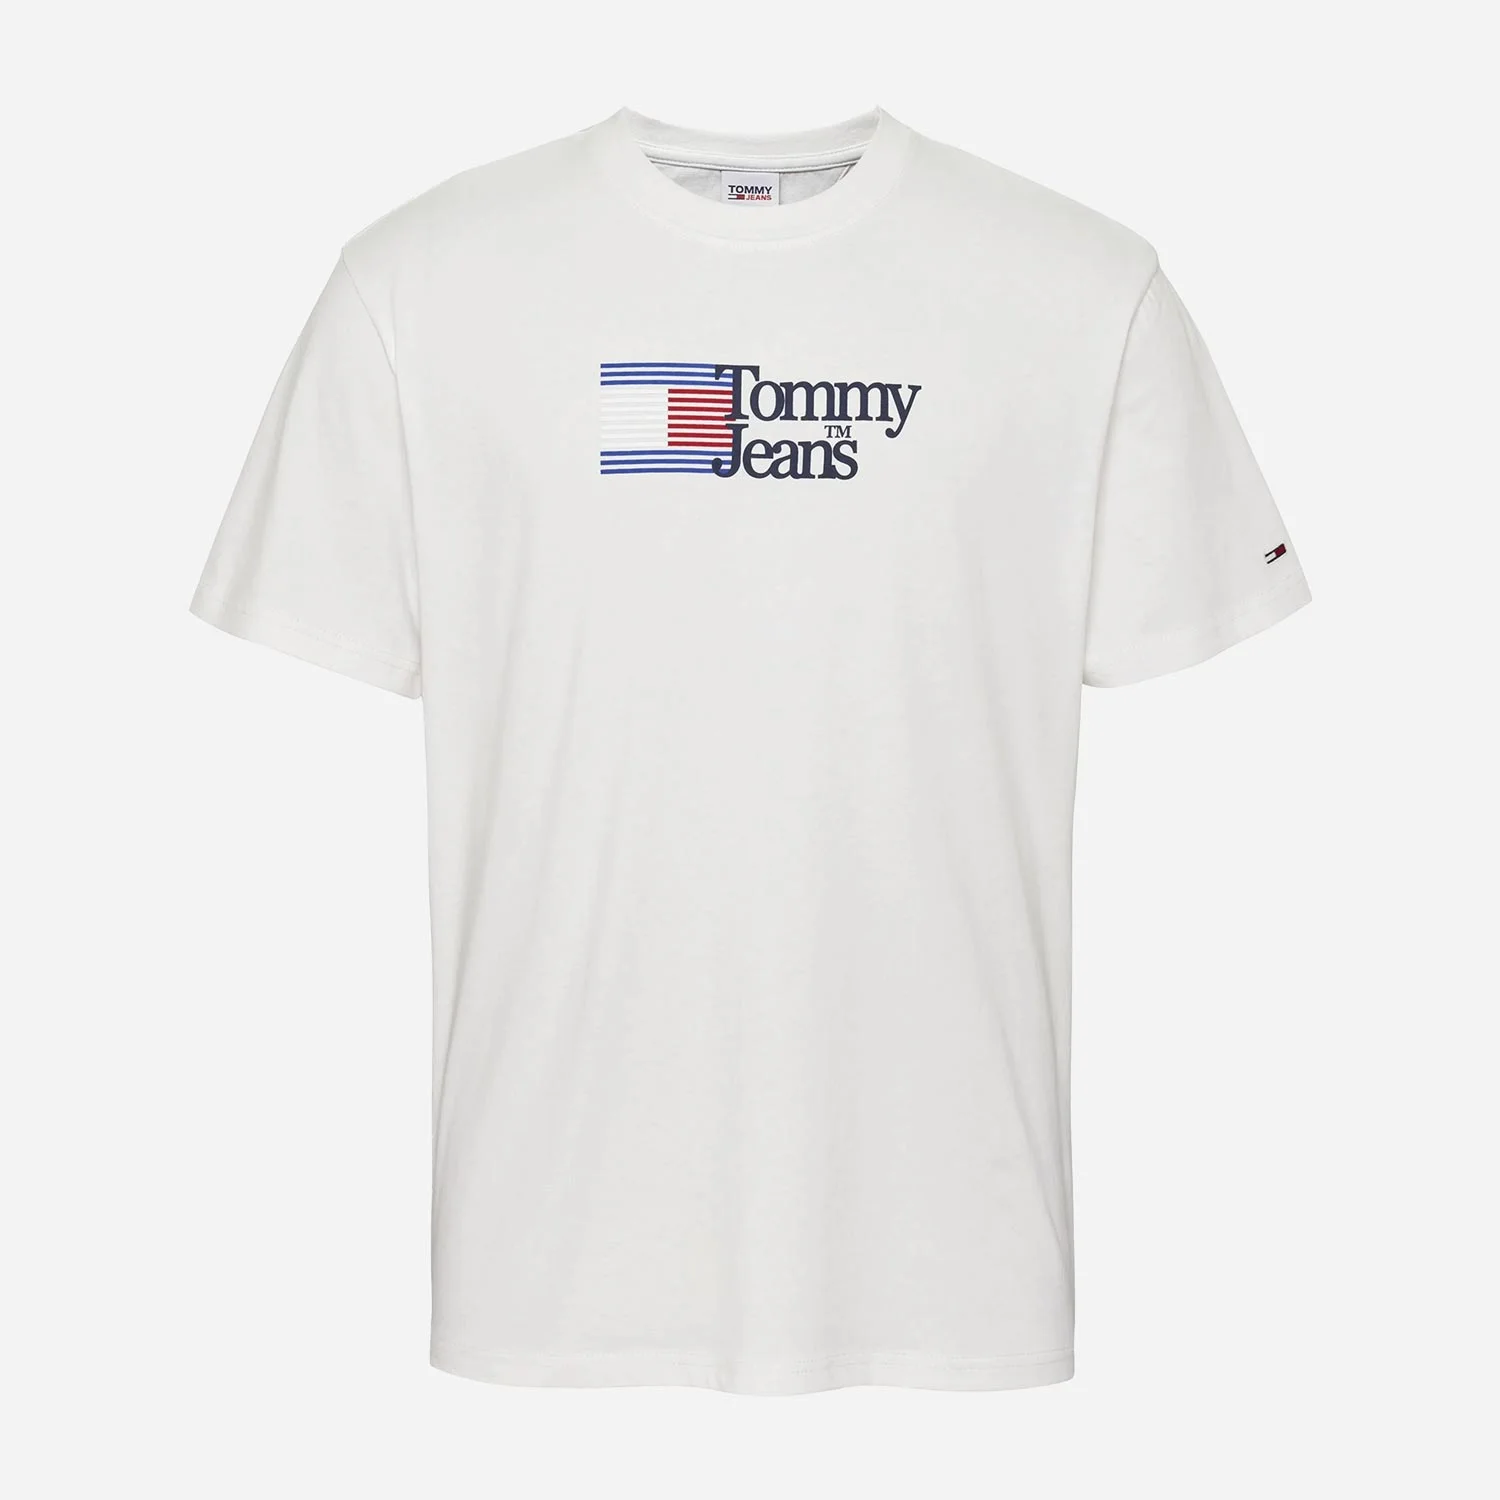 Tommy Jeans | The Cream Store